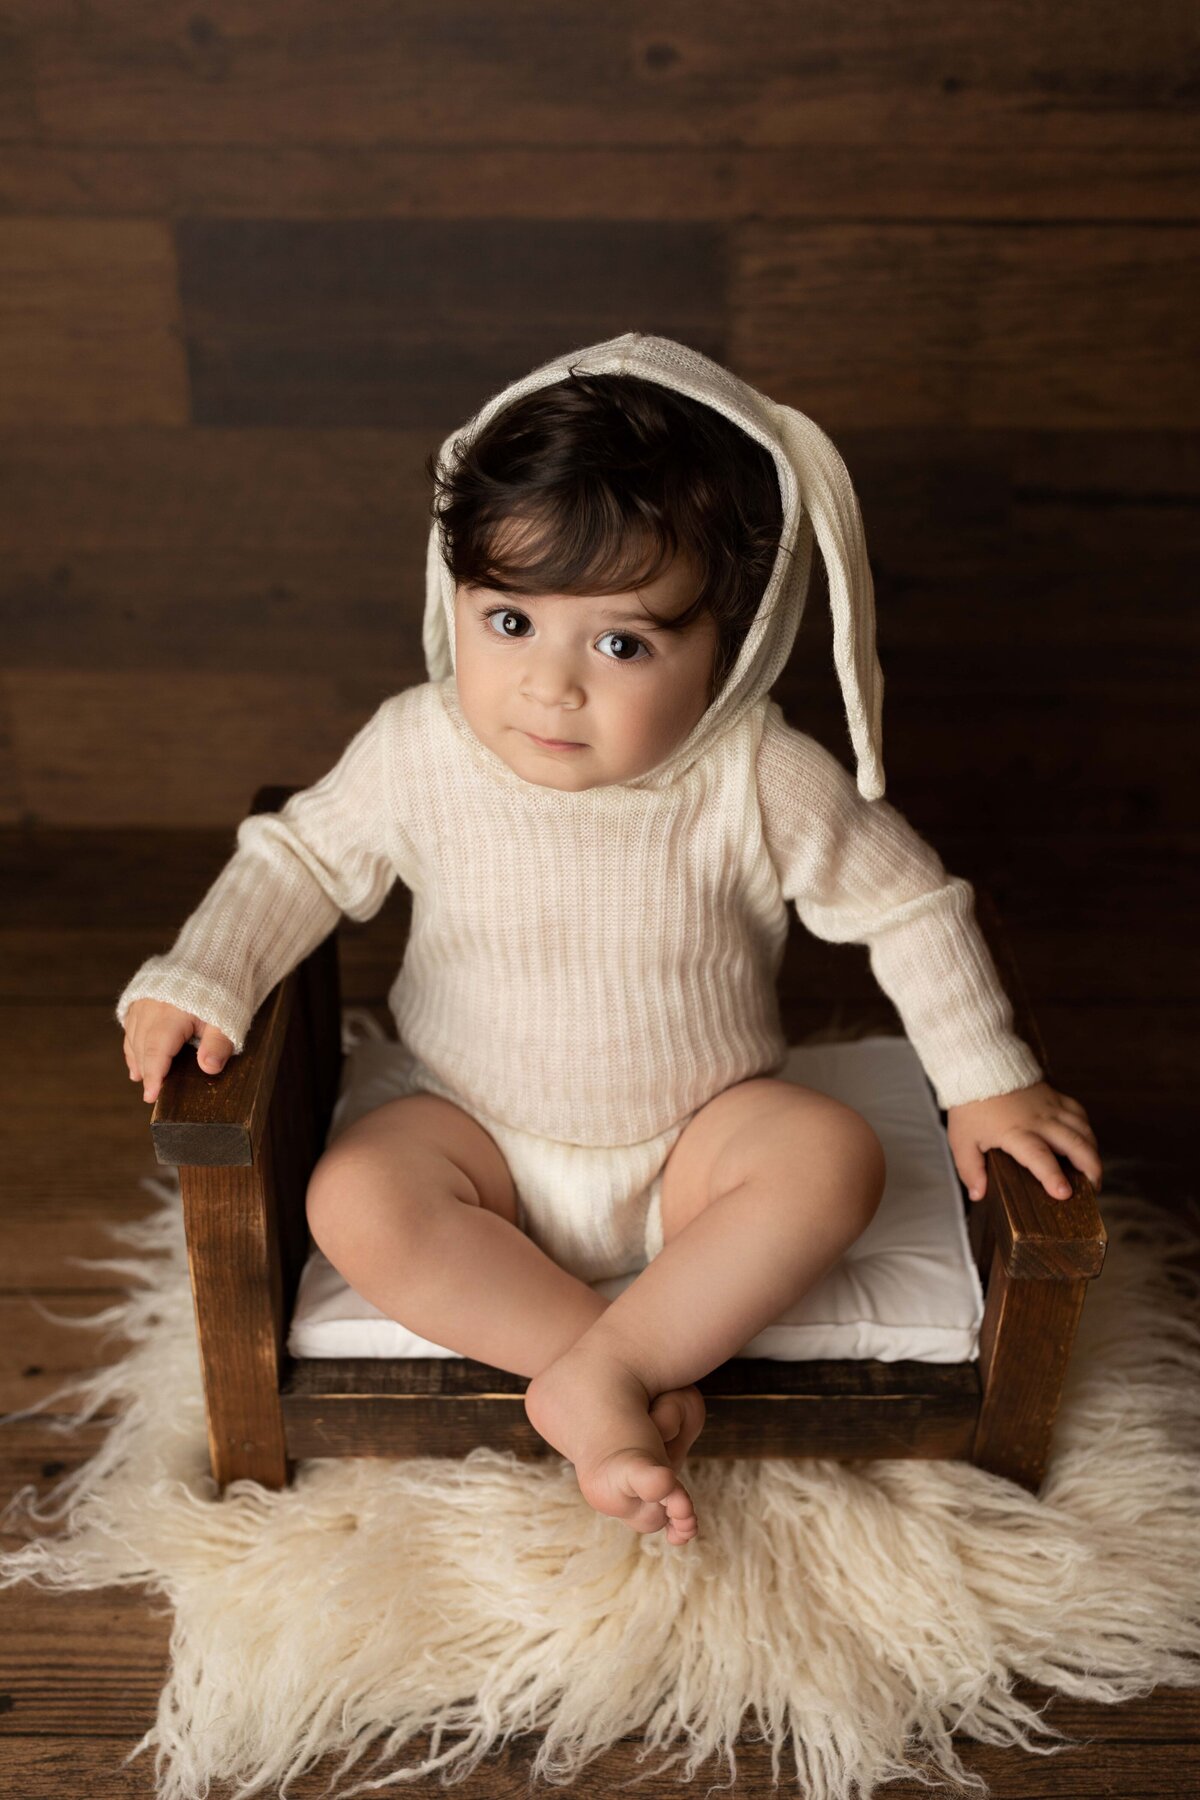 One-year-old sitting on little stool wearing a cream knit onesie with bunny ear hood. Baby is looking intently at the camera.